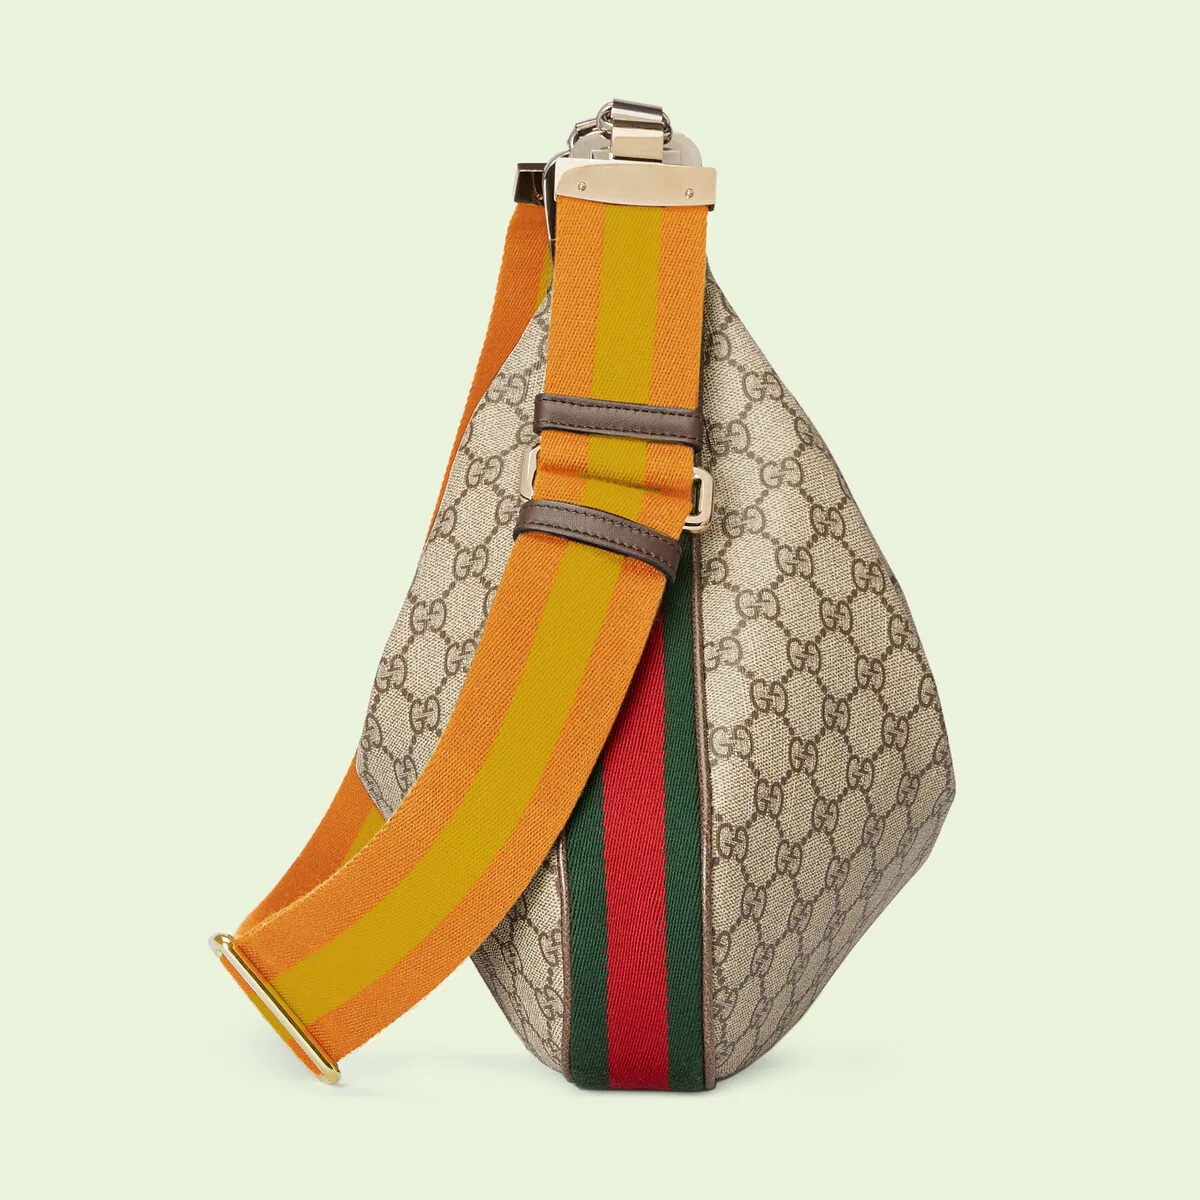 GUCCI Attache large textured leather-trimmed coated-canvas shoulder bag